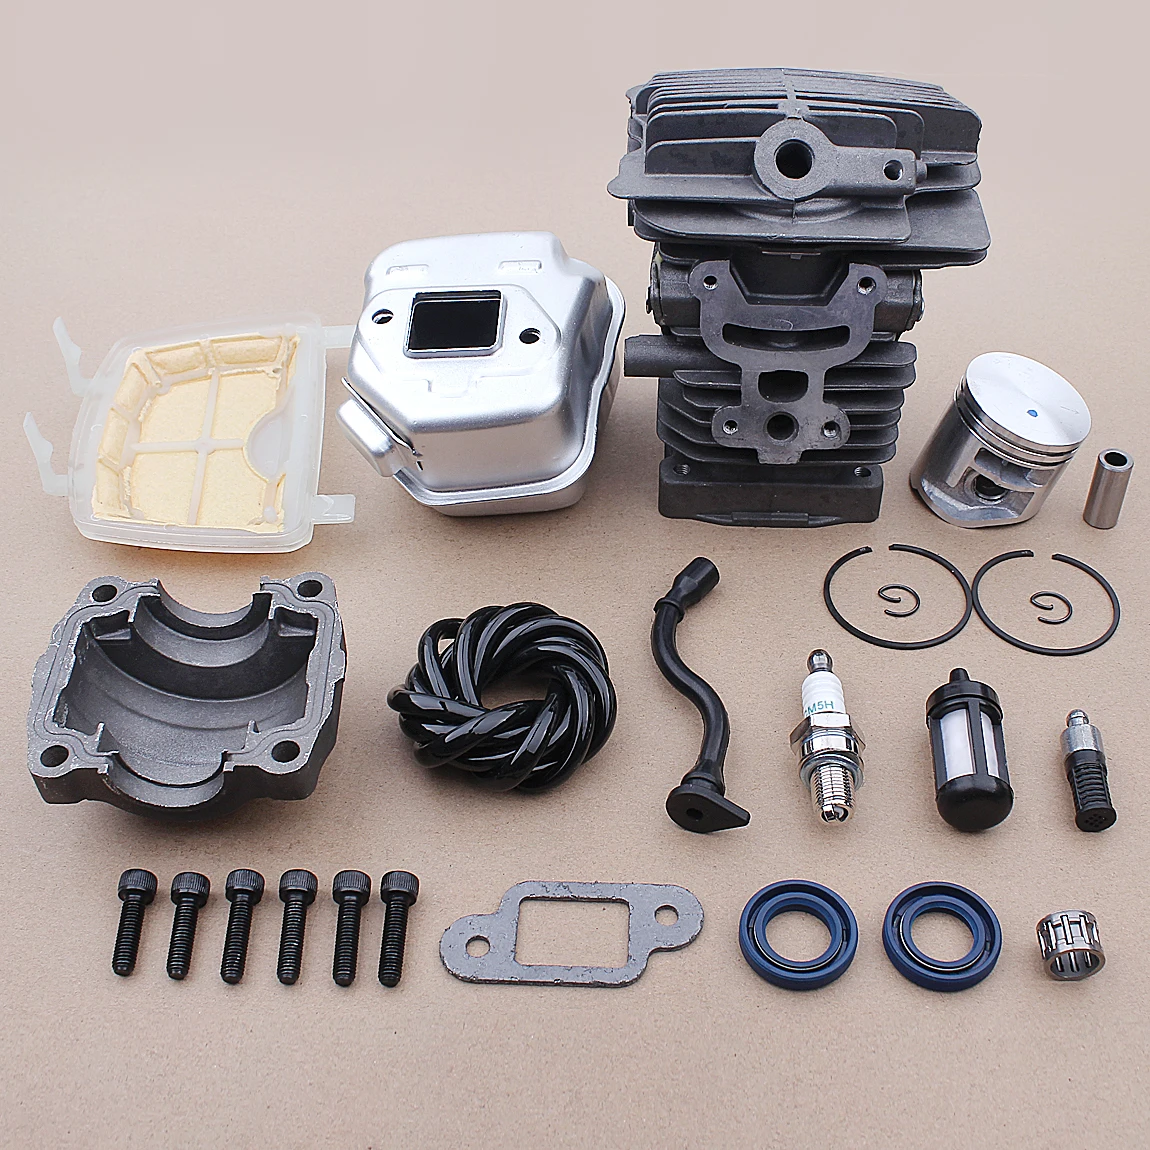 38mm Cylinder Piston Exhaust Muffler Kit For Stihl MS181 Air Fuel Oil Seal Filter Line Engine Pan Base Bearing Chainsaw Parts